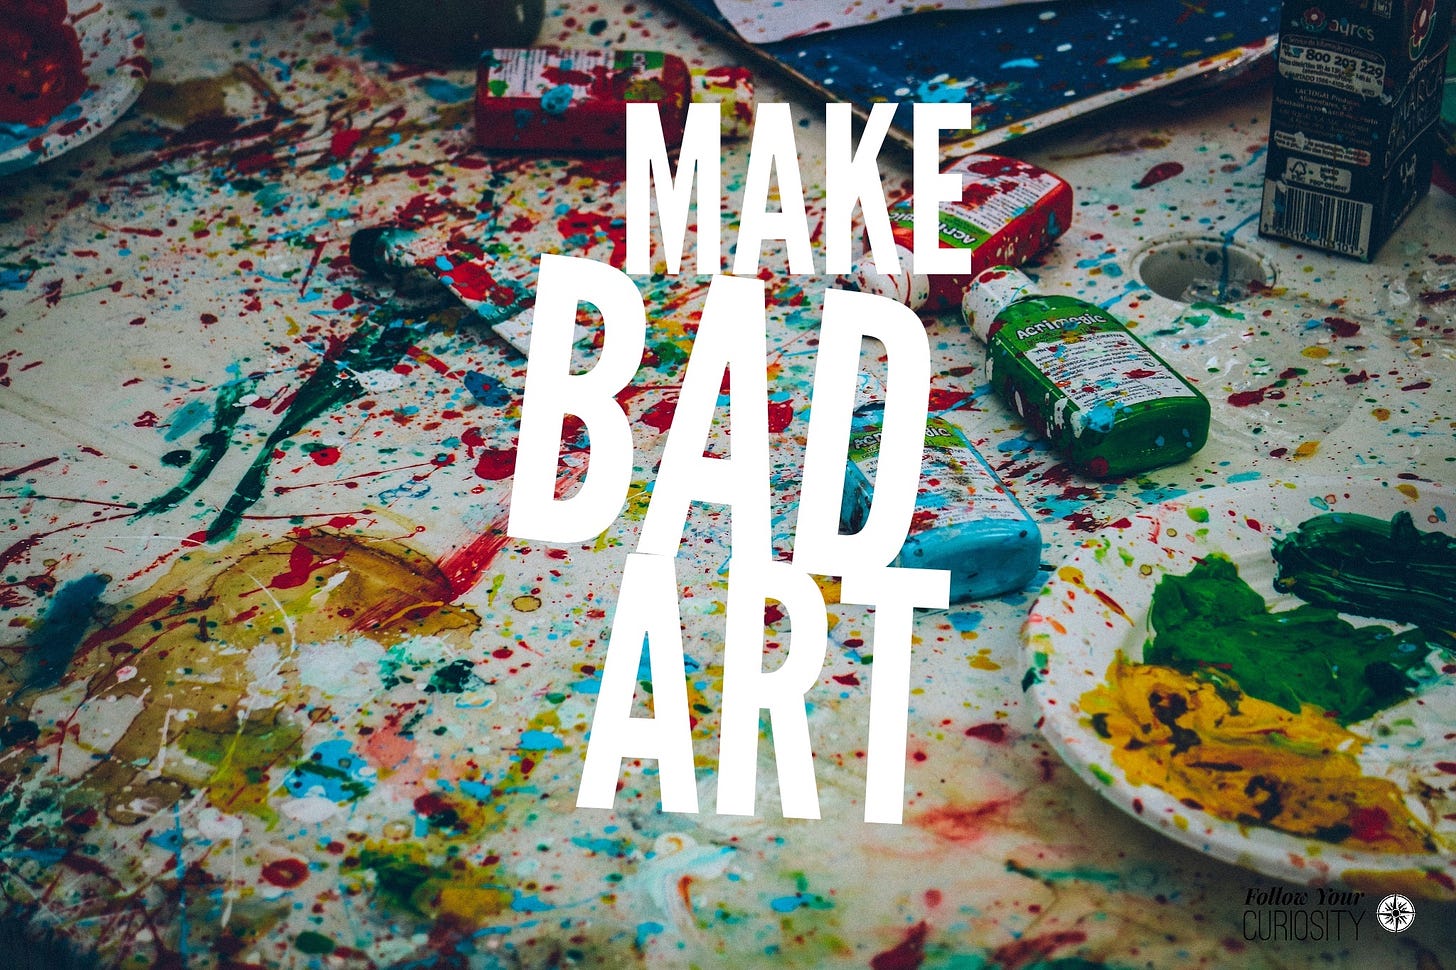 "Make Bad Art" on a background of messy art supplies